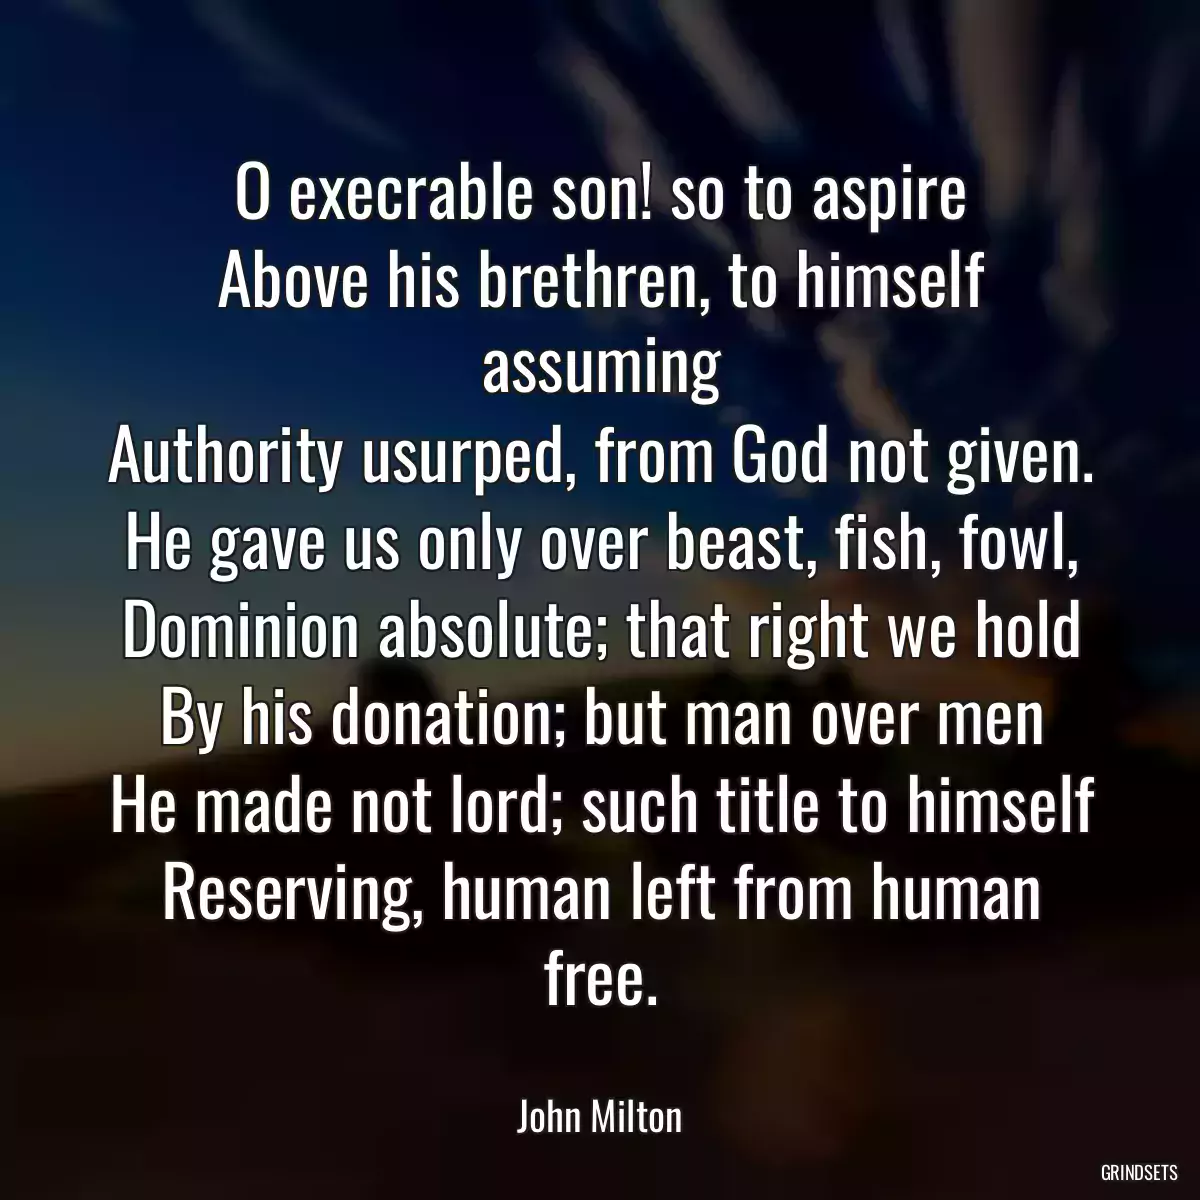 O execrable son! so to aspire
Above his brethren, to himself assuming
Authority usurped, from God not given.
He gave us only over beast, fish, fowl,
Dominion absolute; that right we hold
By his donation; but man over men
He made not lord; such title to himself
Reserving, human left from human free.